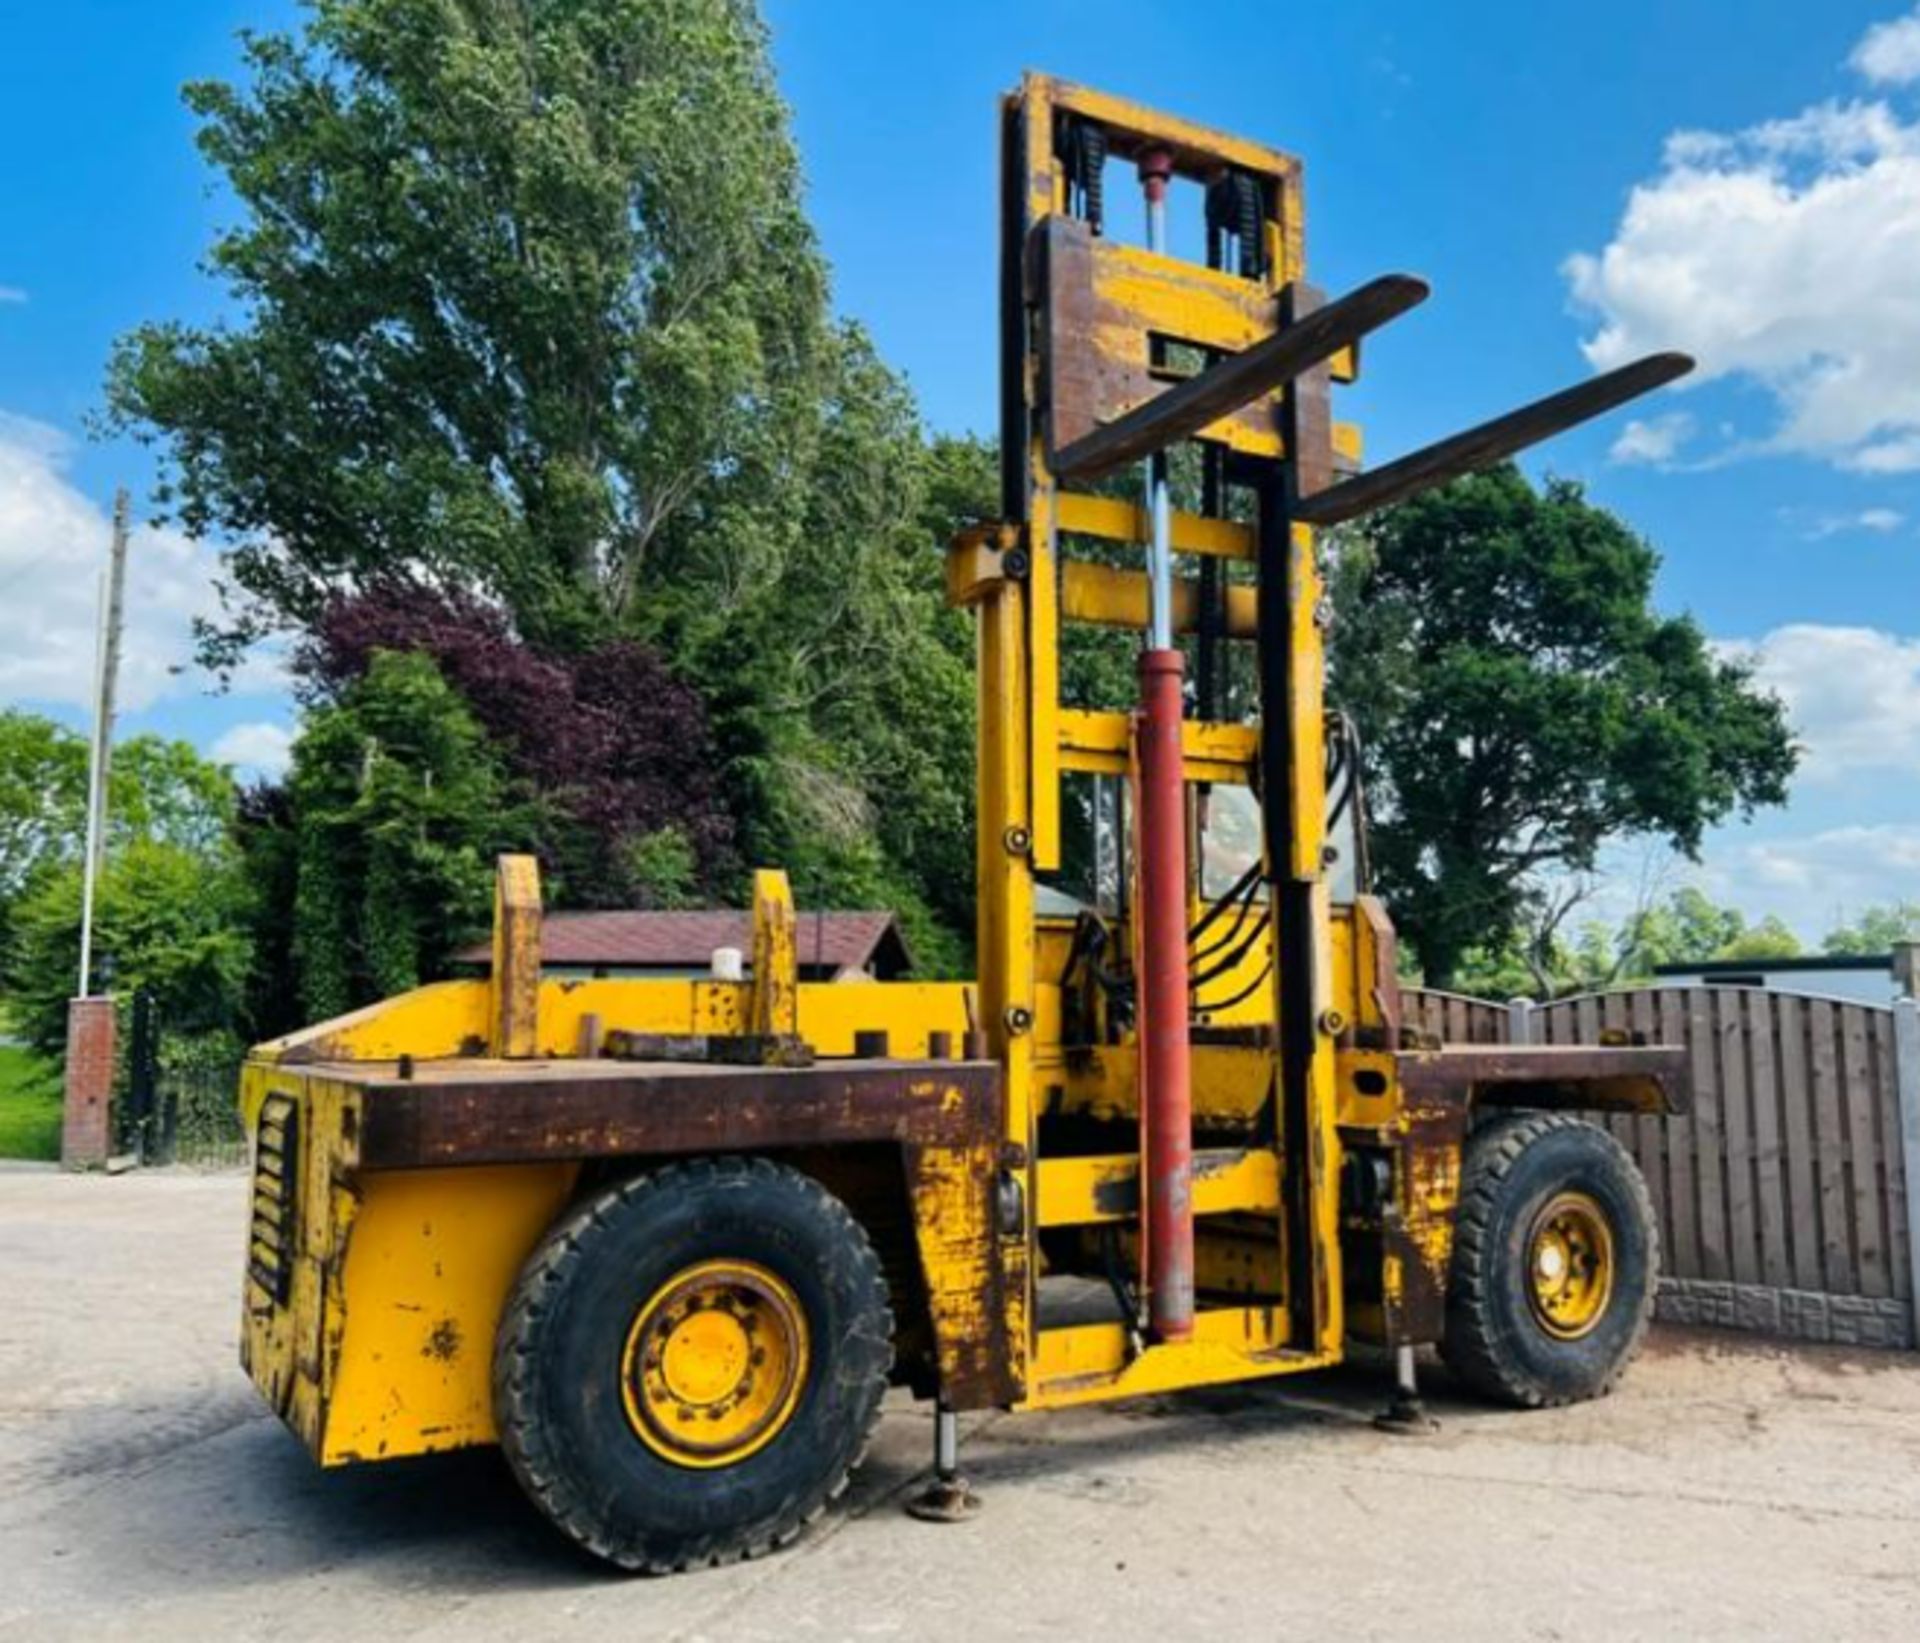 SSP SIDE LOAD DIESEL FORKLIFT C/W 2 X HYDRAULIC SUPPORT LEGS - Image 8 of 17